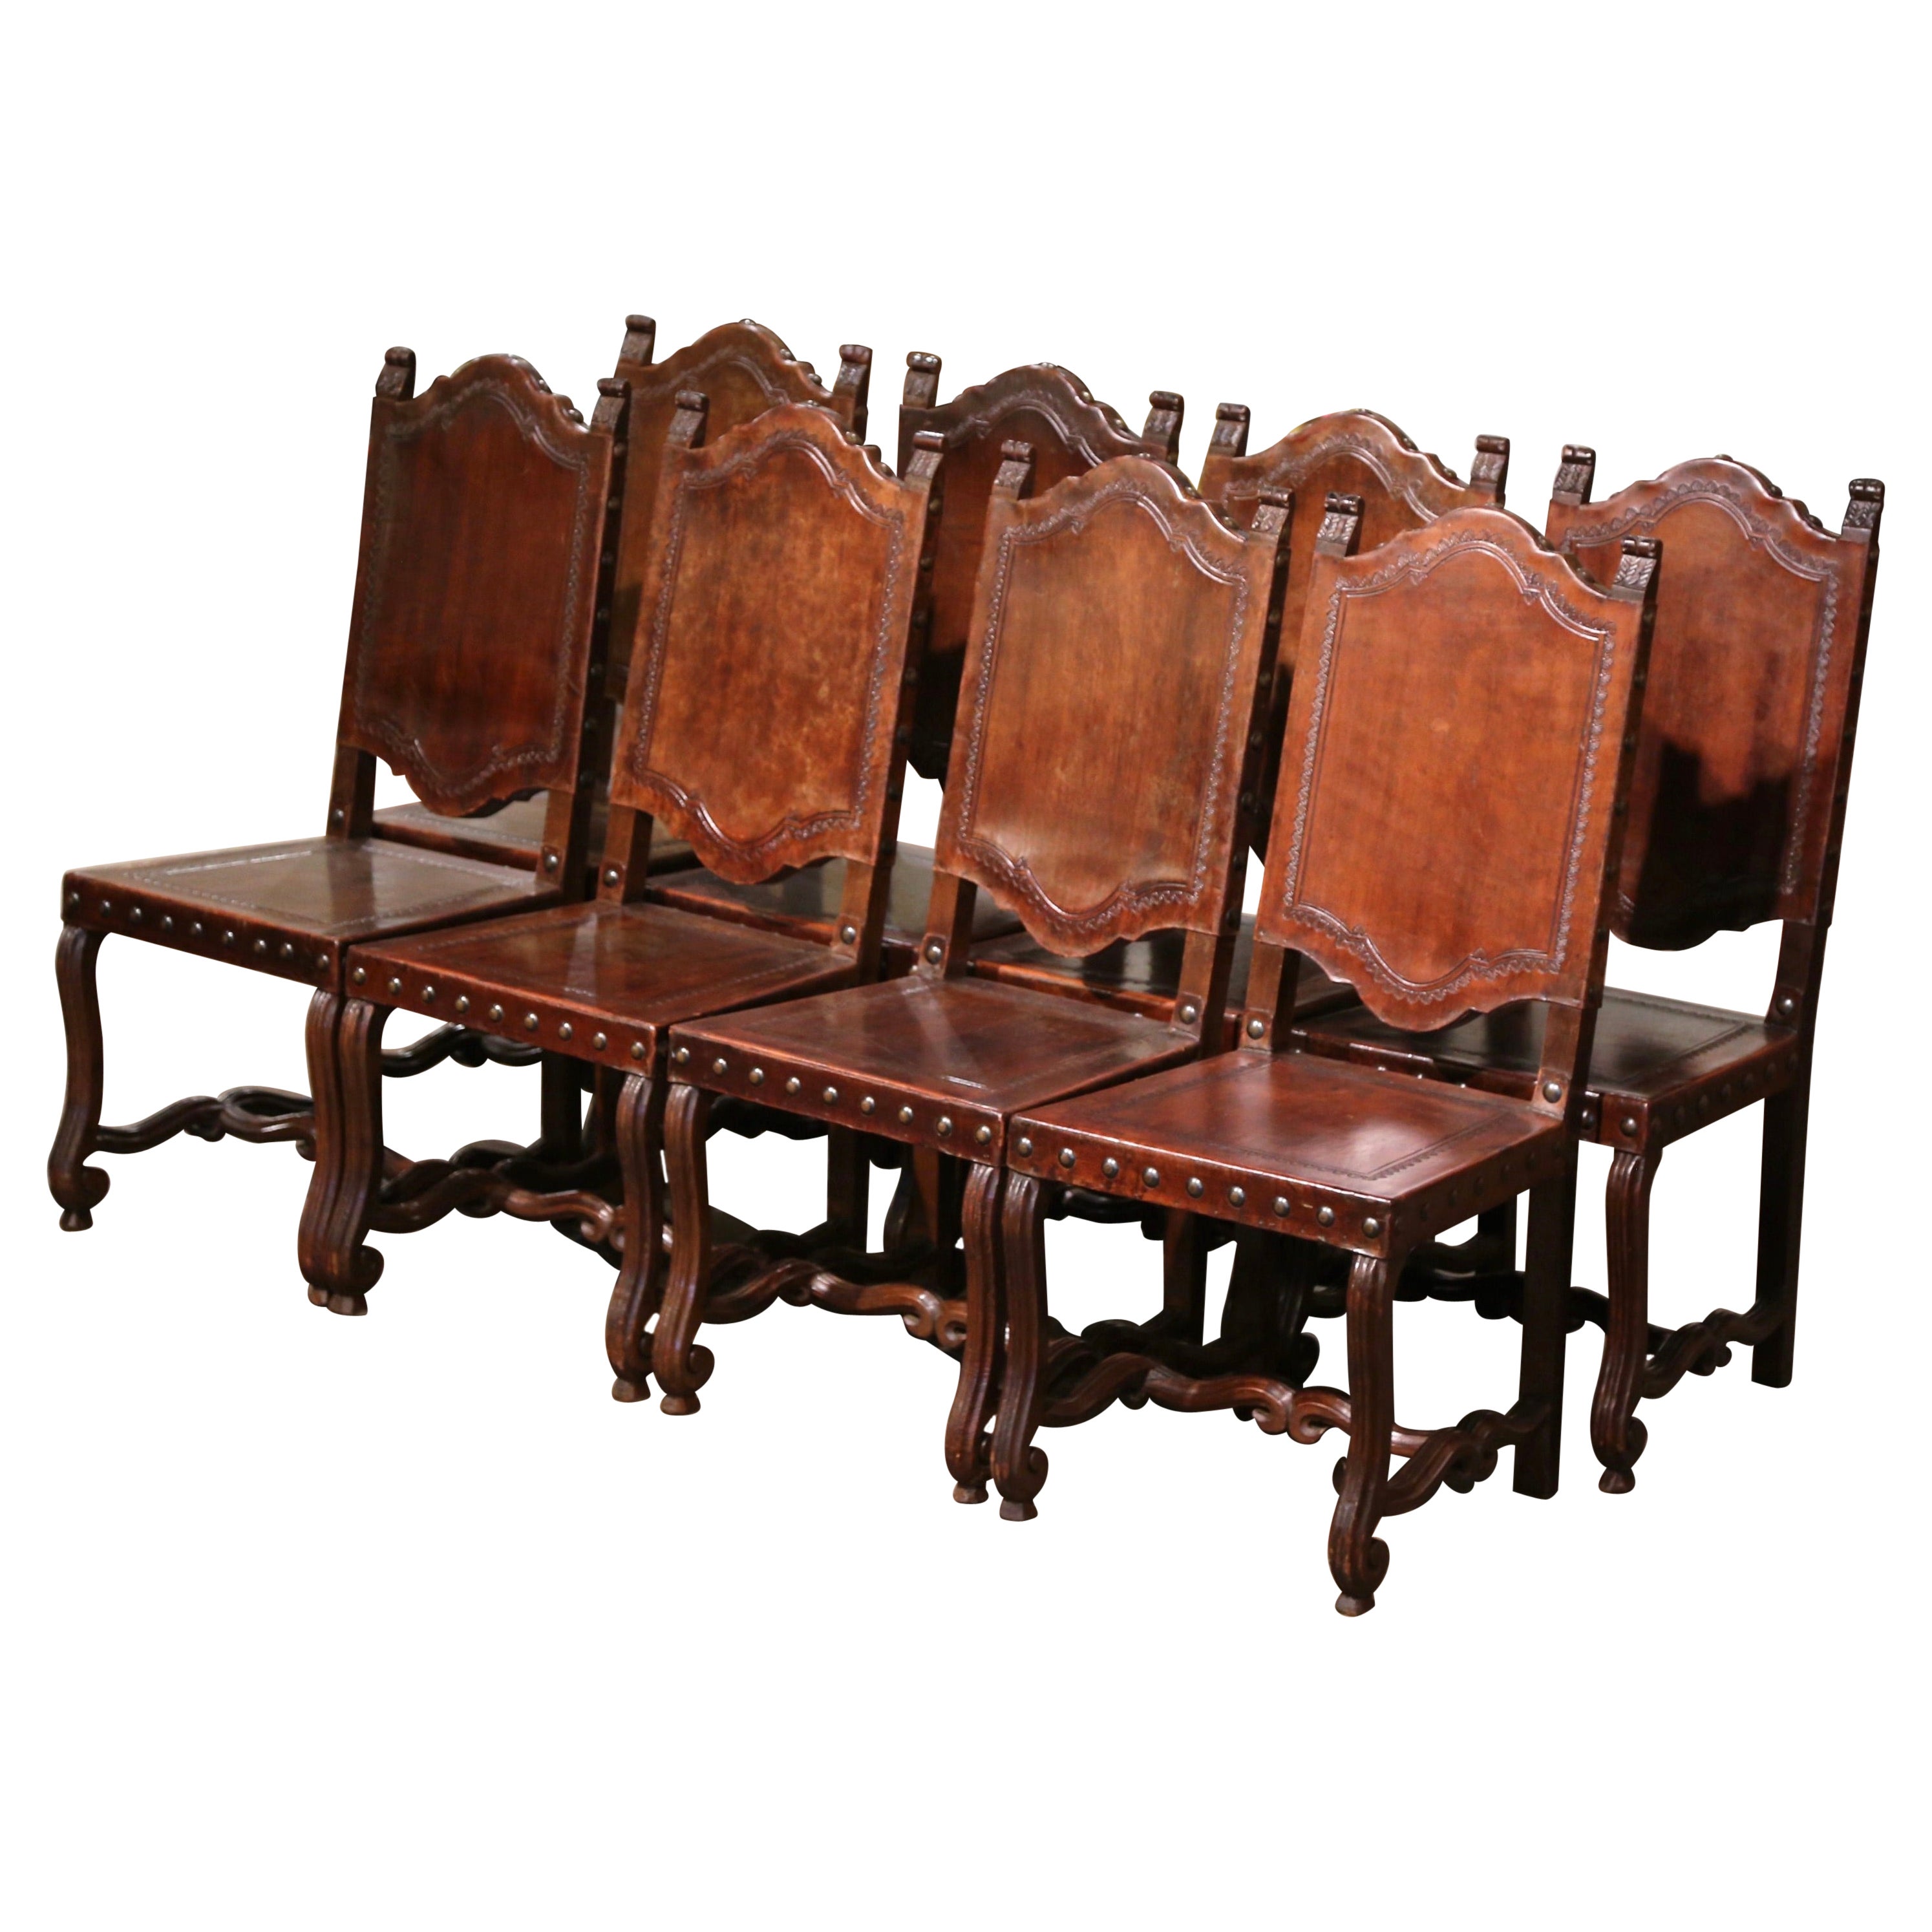  19th Century Spanish Carved Walnut Chairs with Embossed Leather, Set of Eight